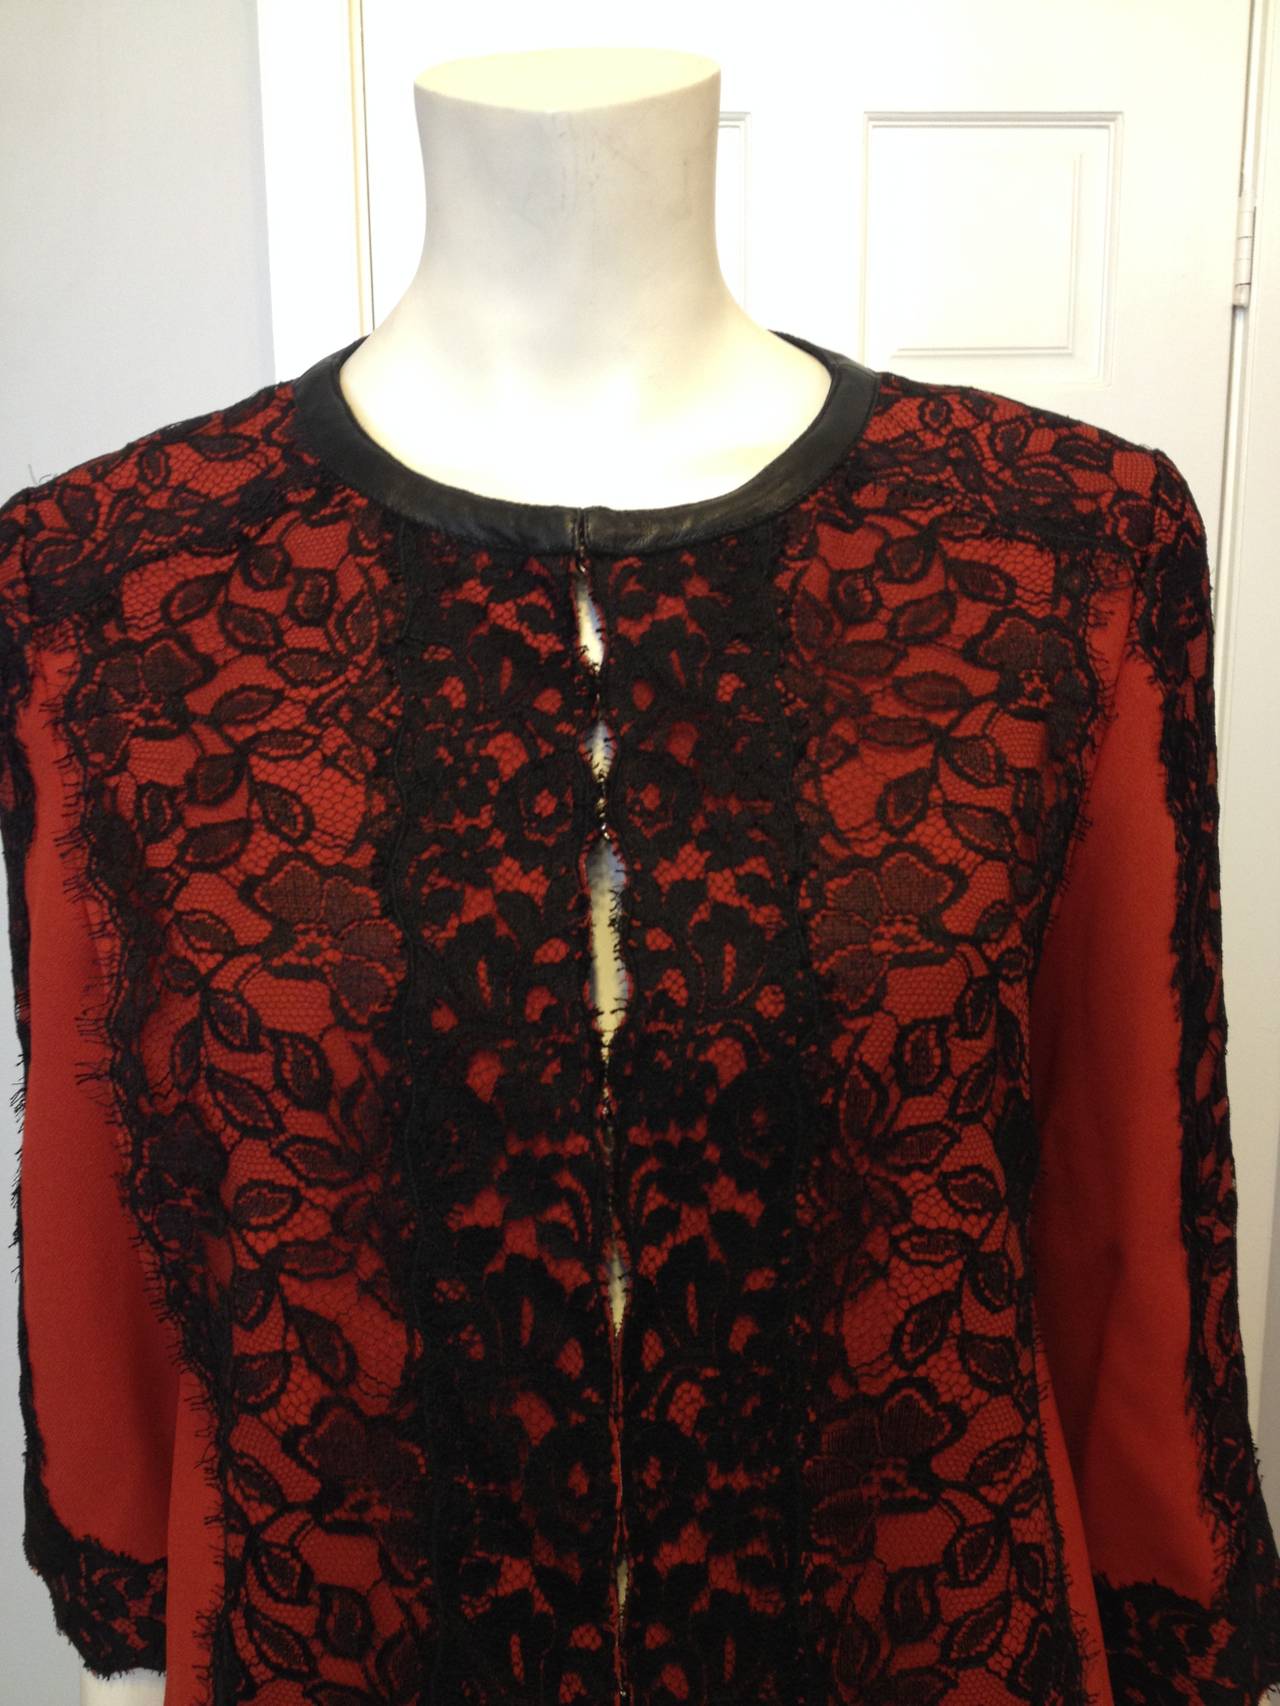 It's difficult to make delicate black lace feel bold and new, but Andrew Gn has done it with this piece. Overlaid over a beautiful and modern cleanly cut rust red coat, it creates a beautiful silhouette against the bright color and forms lovely